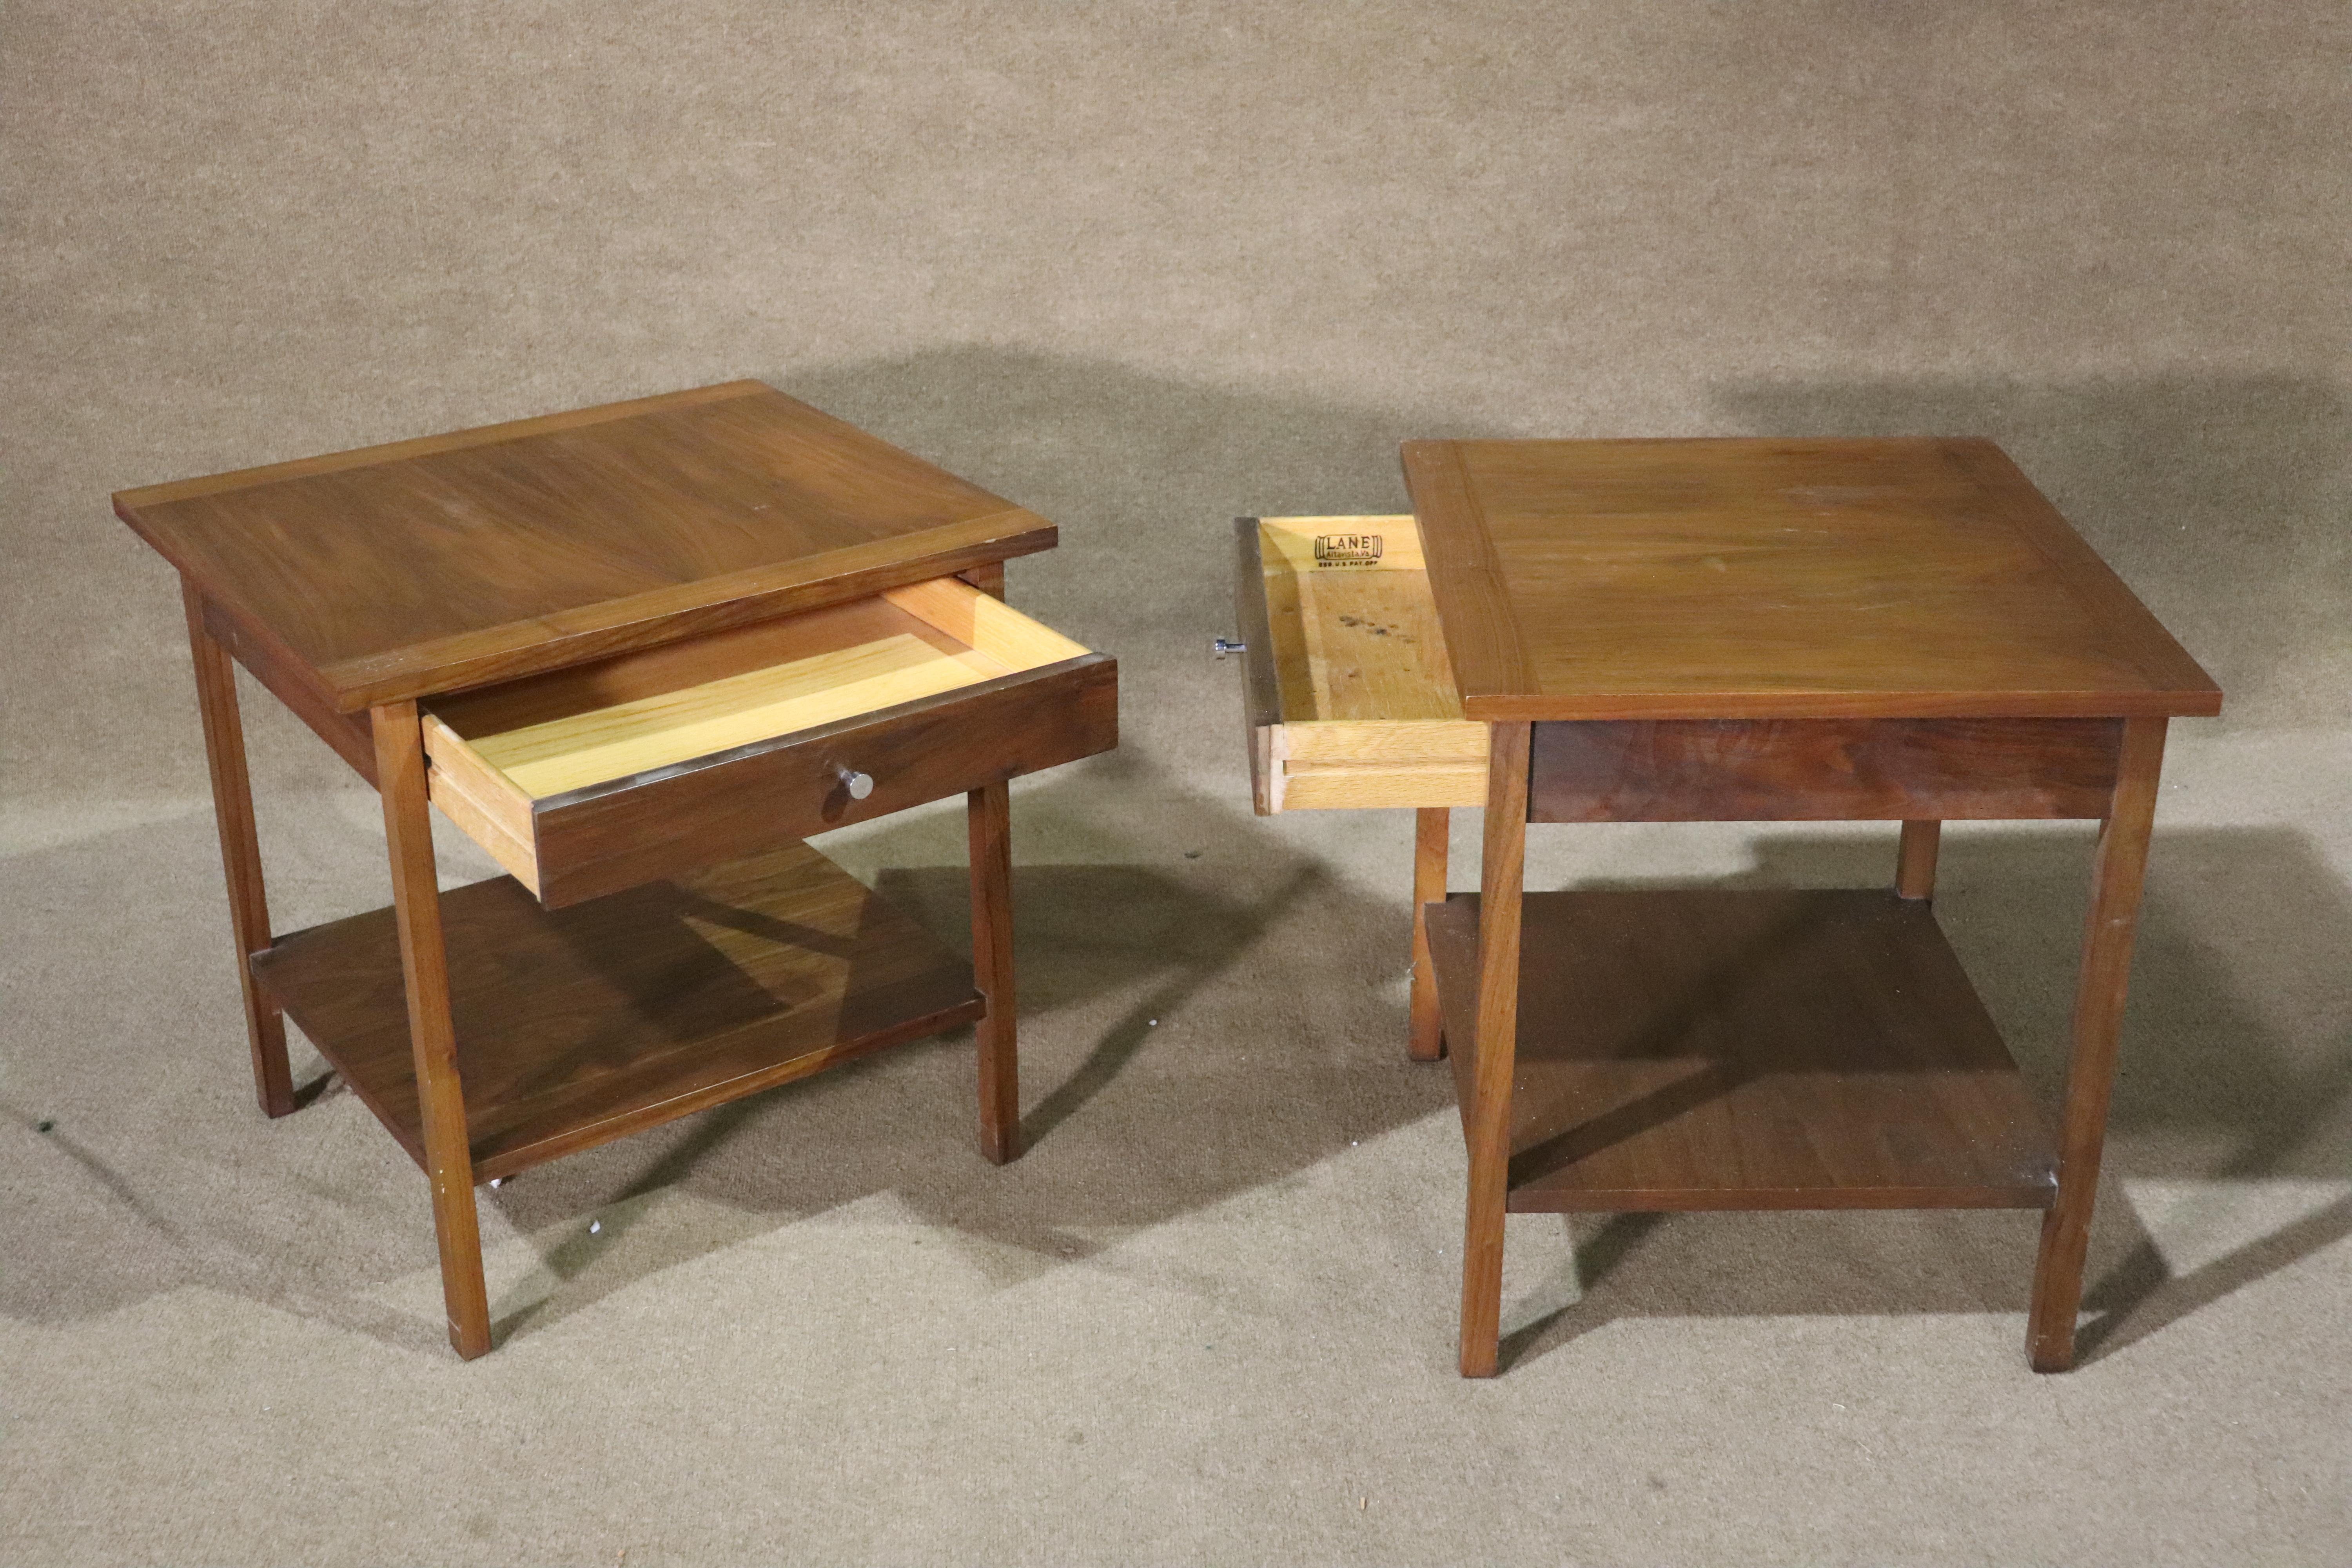 Mid-century modern end tables by Lane Furniture with single drawer and bottom shelf.
Please confirm location NY or NJ